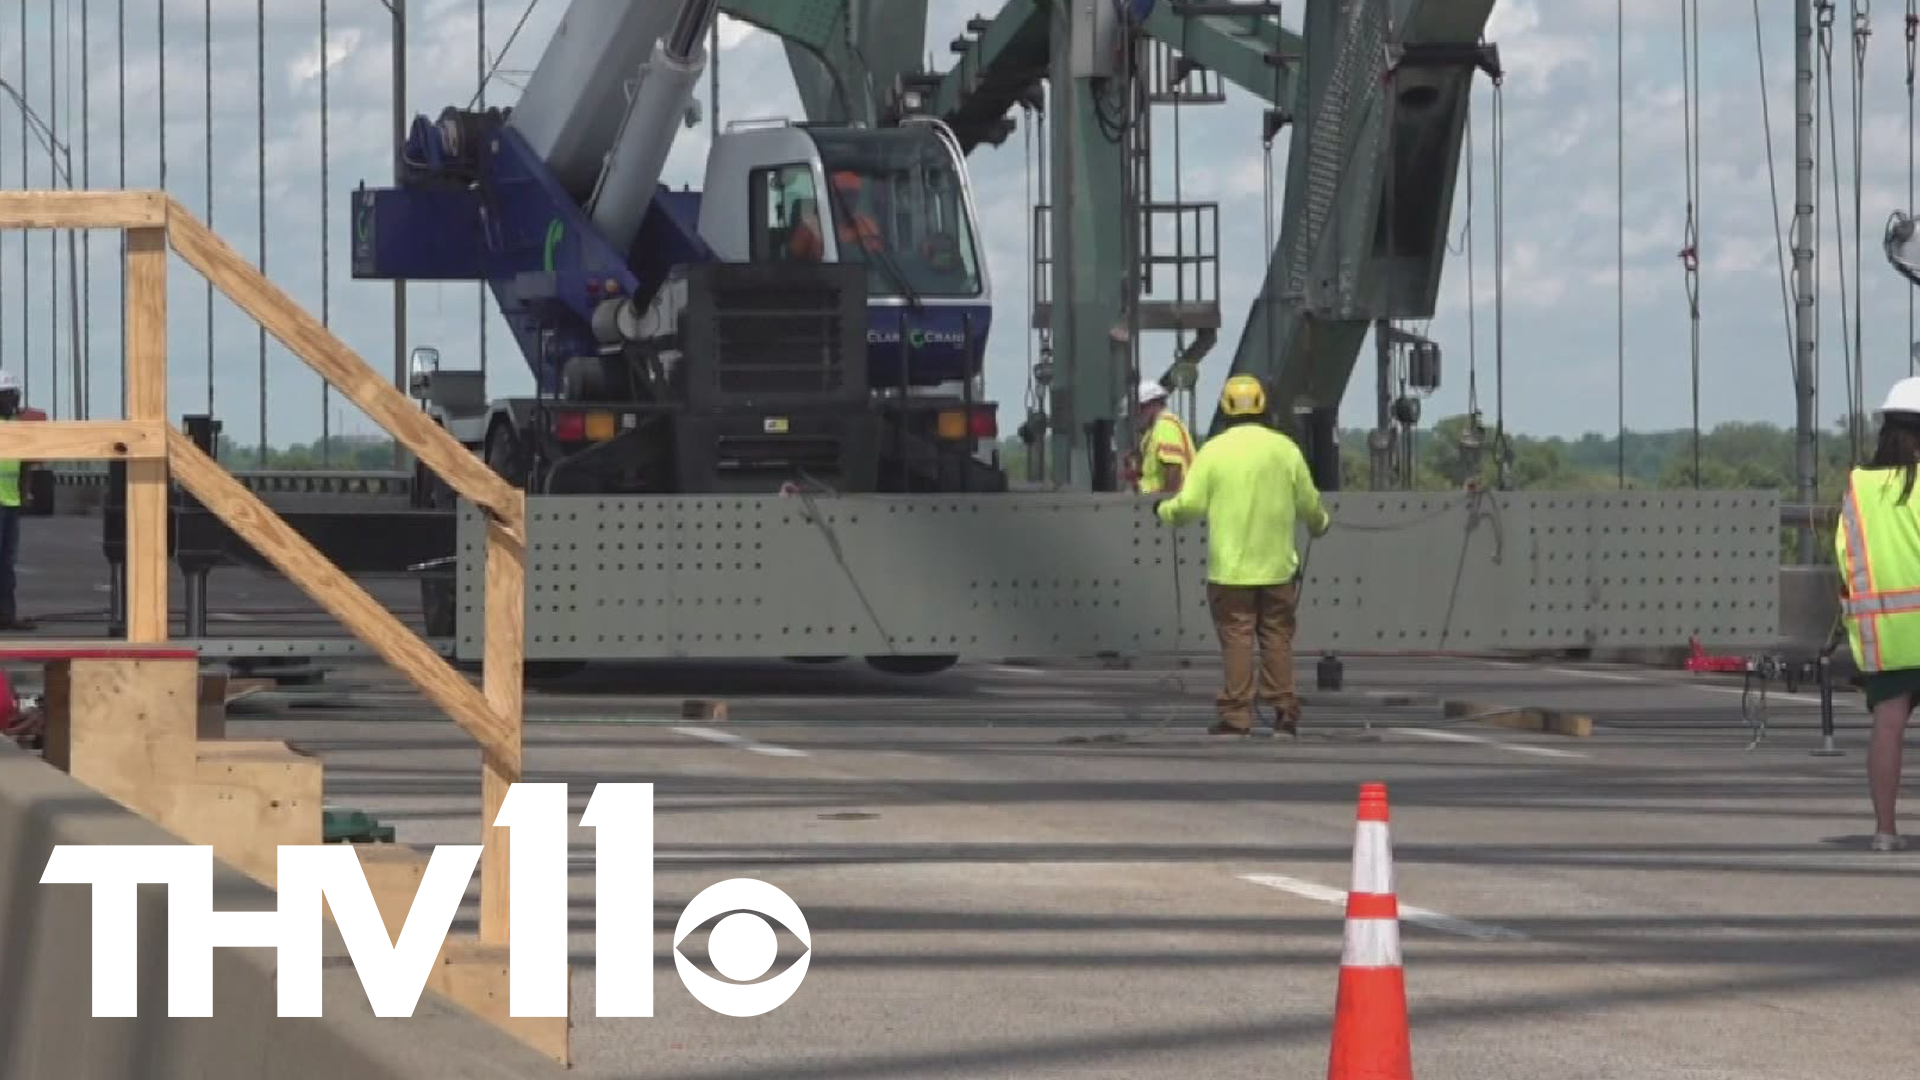 Nearly 2 months after spotting a huge crack on the I-40 bridge over the Mississippi River, crews have finally removed the cracked beam and begin phase two of repairs